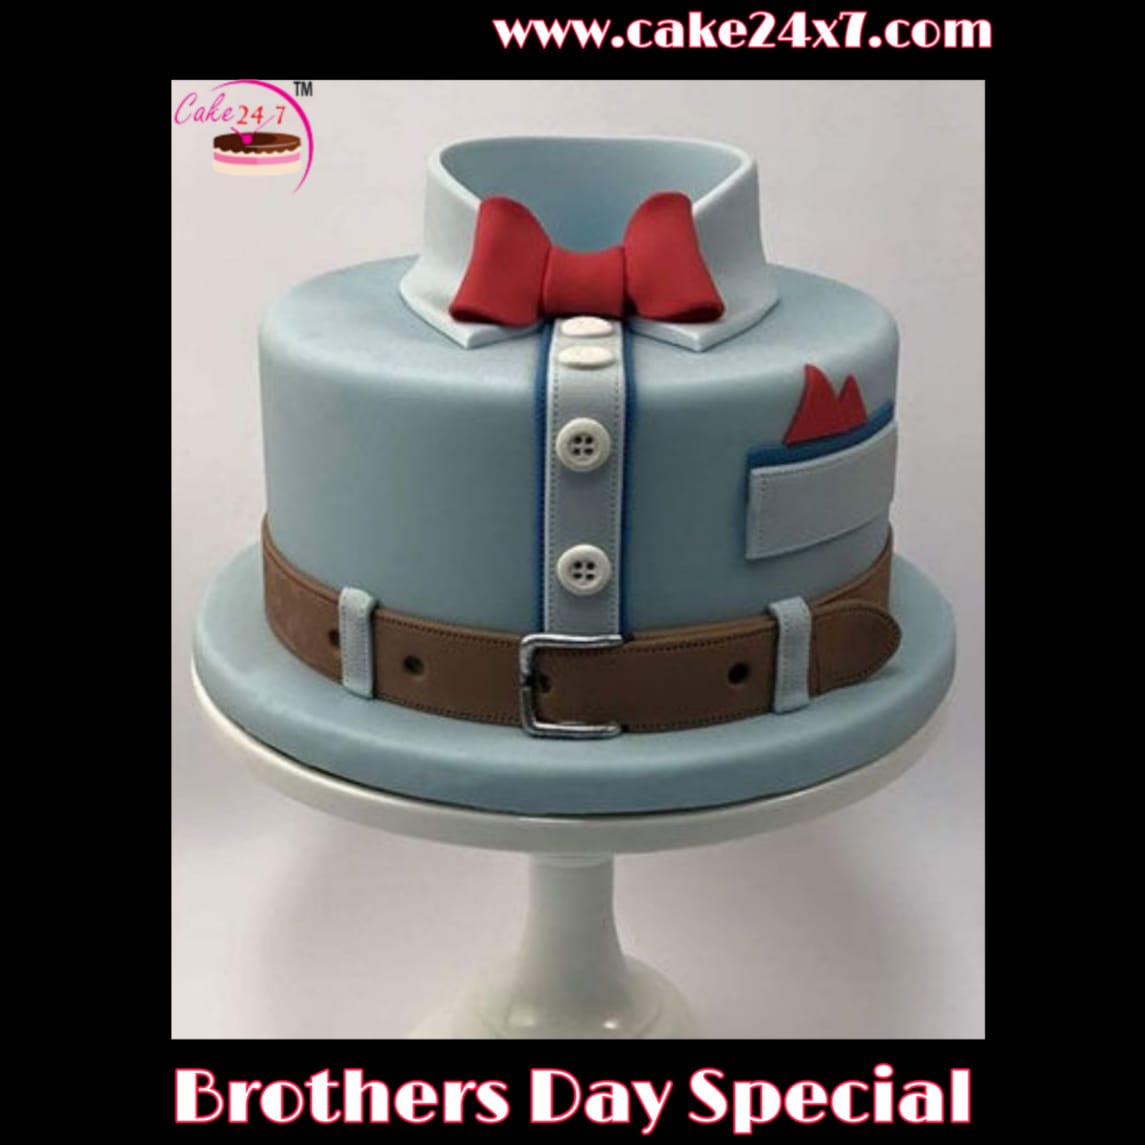 Brother's Day Special, 24x7 Home delivery of Cake in Boring Road ...